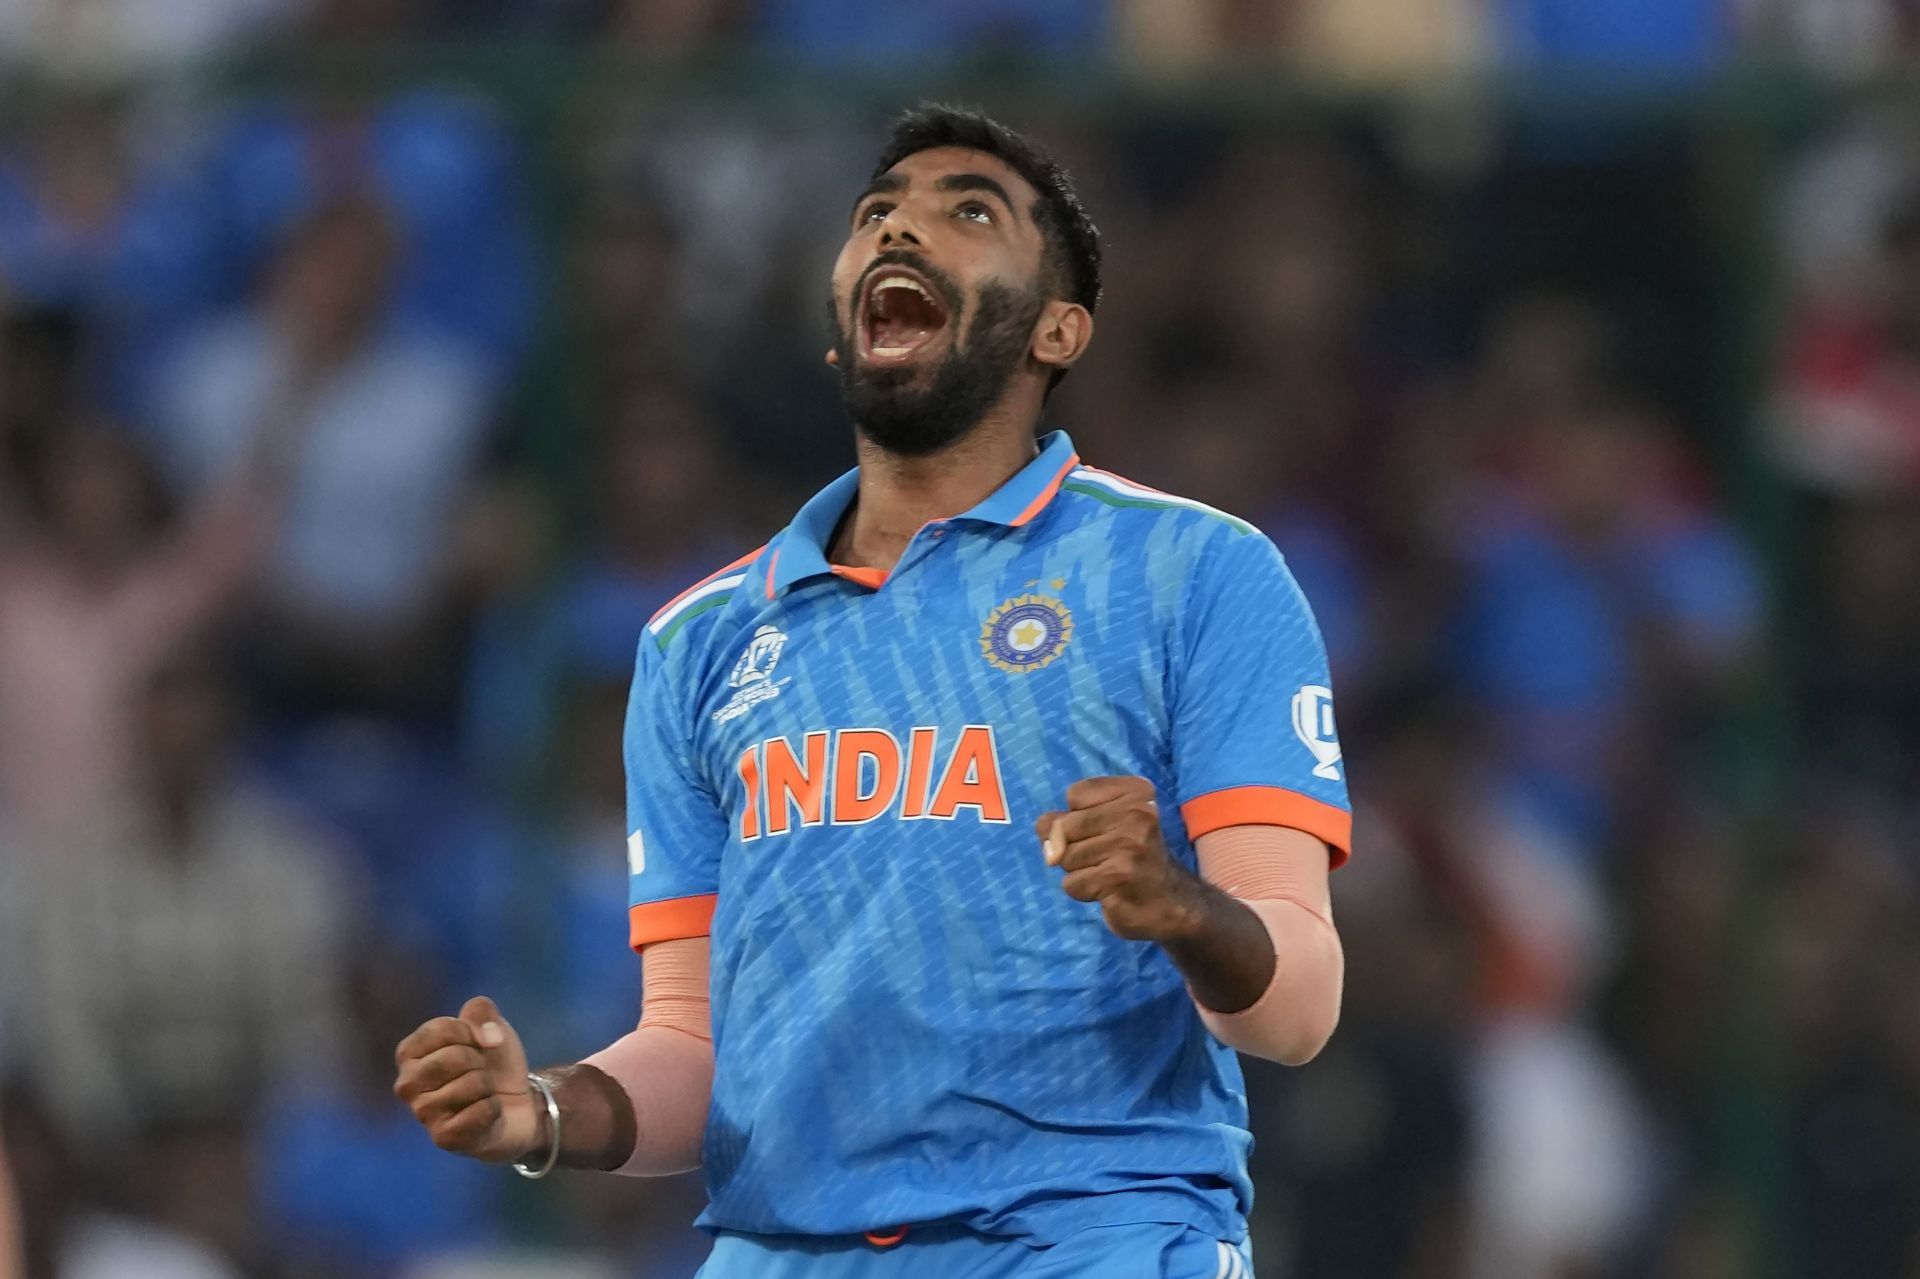 Jasprit Bumrah outbowled Mohammed Siraj in Wednesday&#039;s game. [P/C: AP]